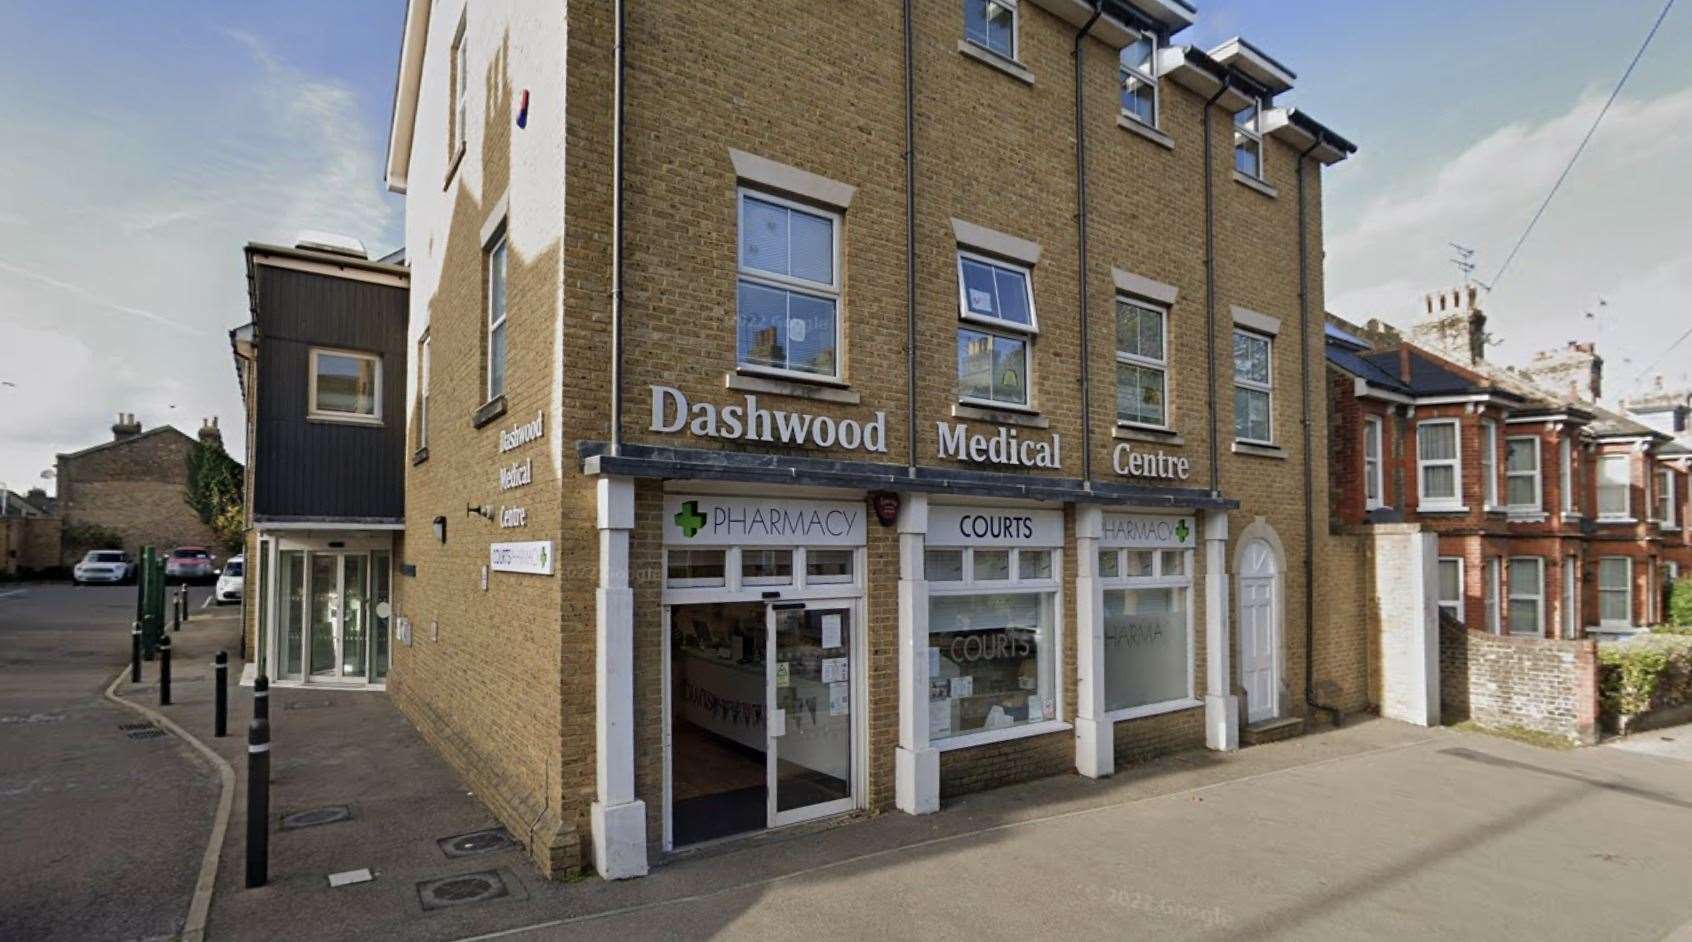 Dashwood Medical Centre in Rasmgate was rated "inadequate" by the Care Quality Commission. Picture: Google